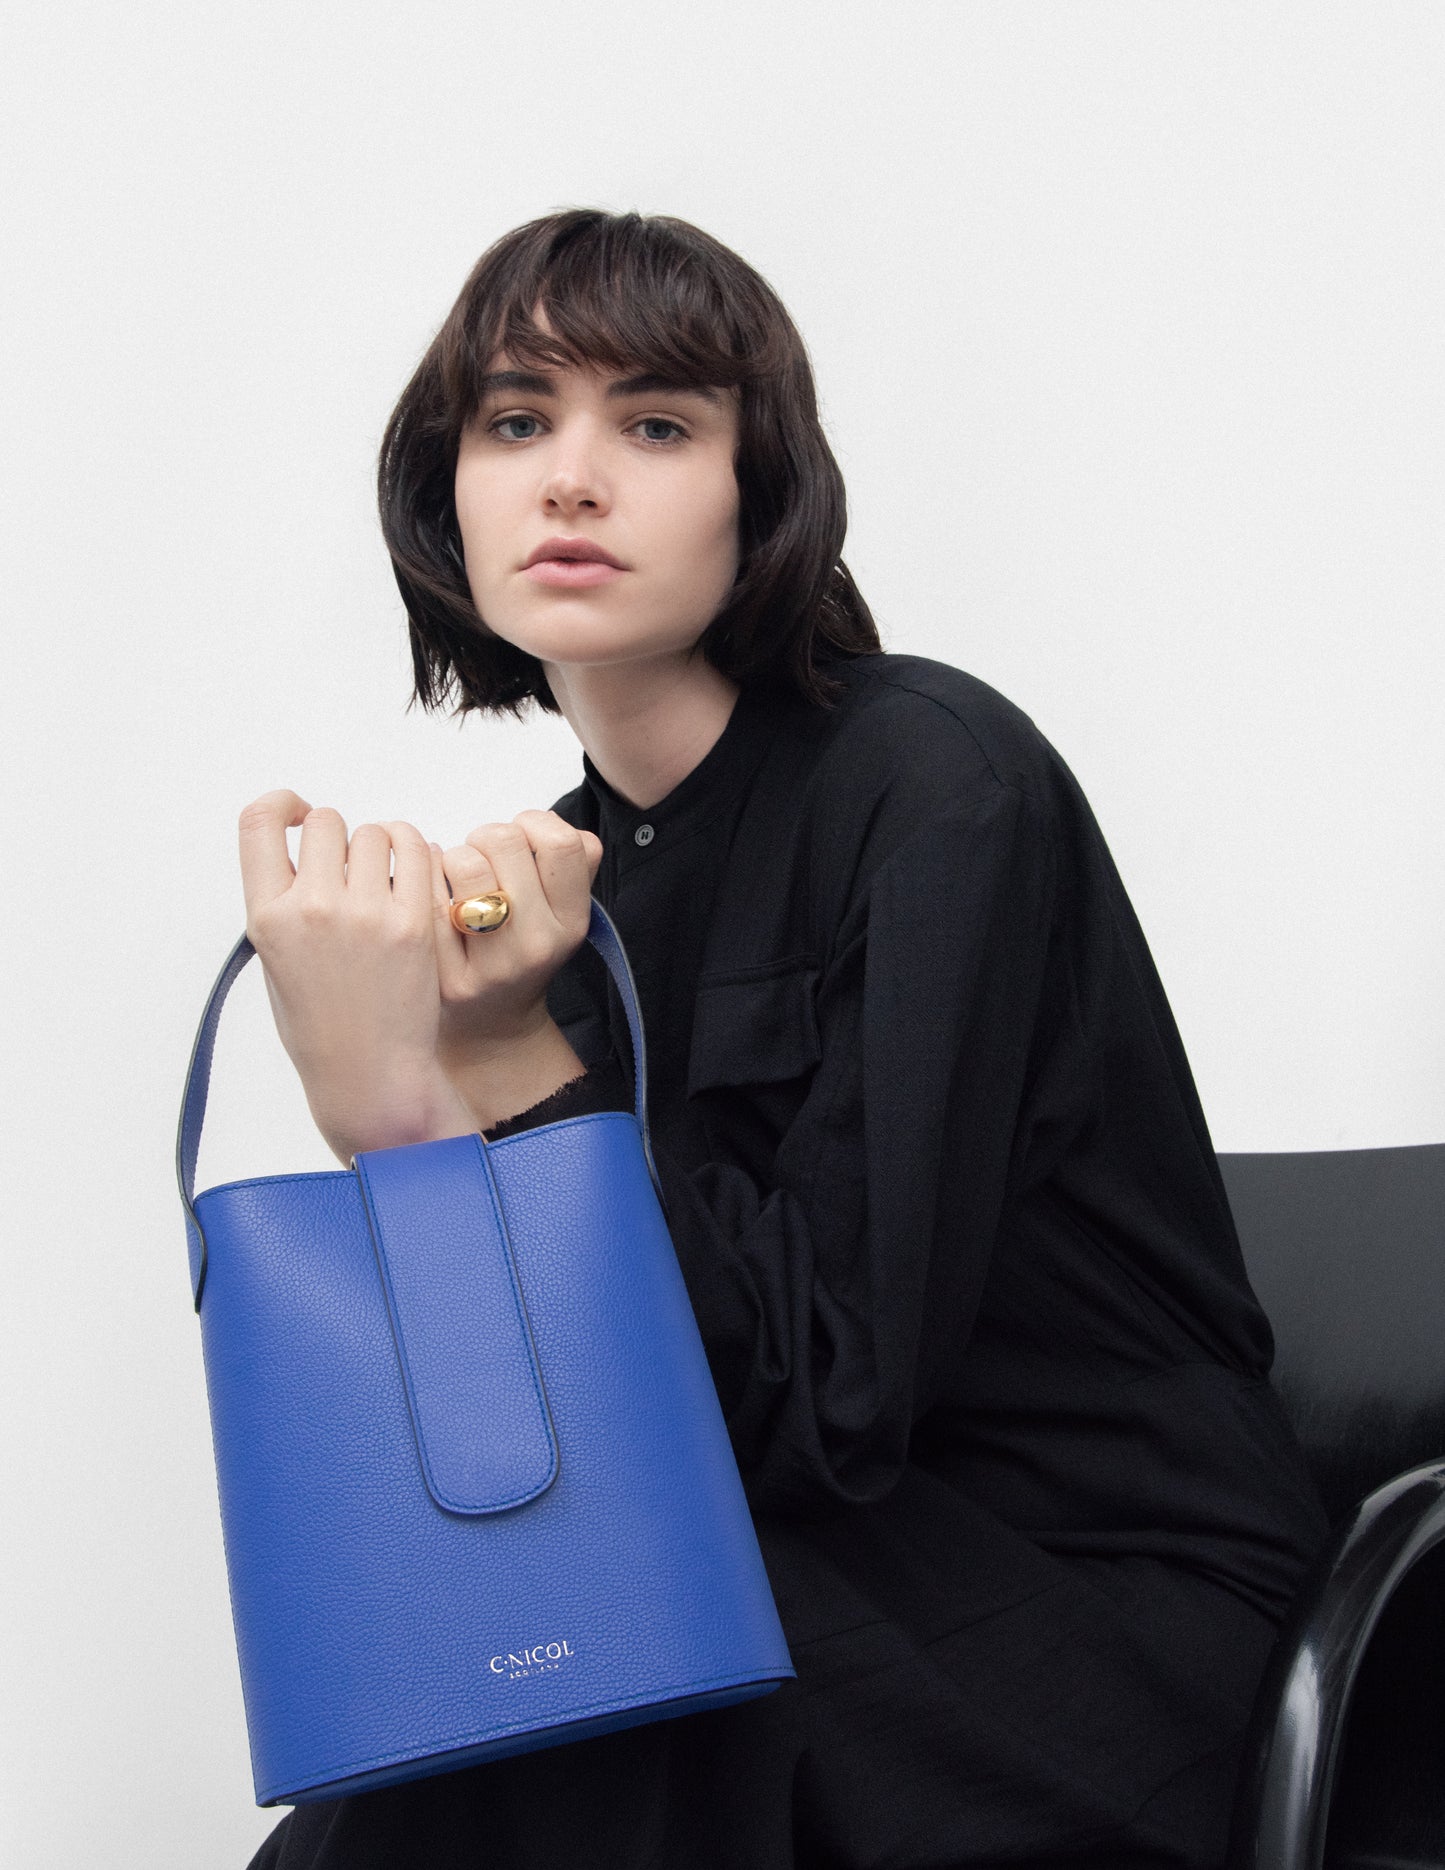 CNicol Blue Leather Holly Bag held by Model wearing all Black sat on Black Chair